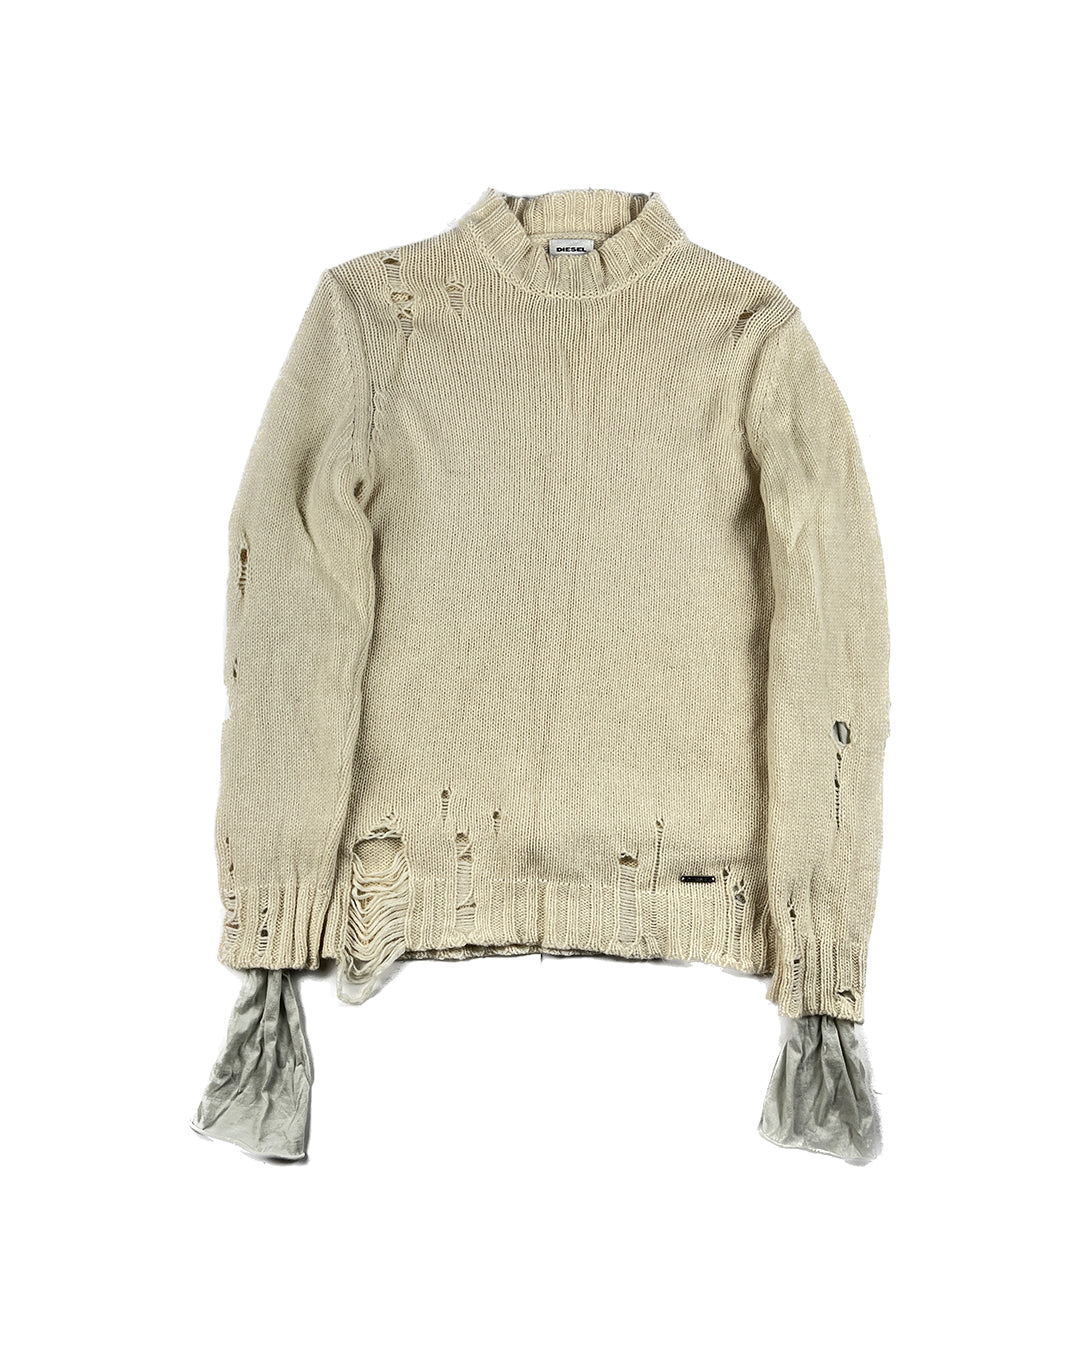 Distressed Open Knit Sweater